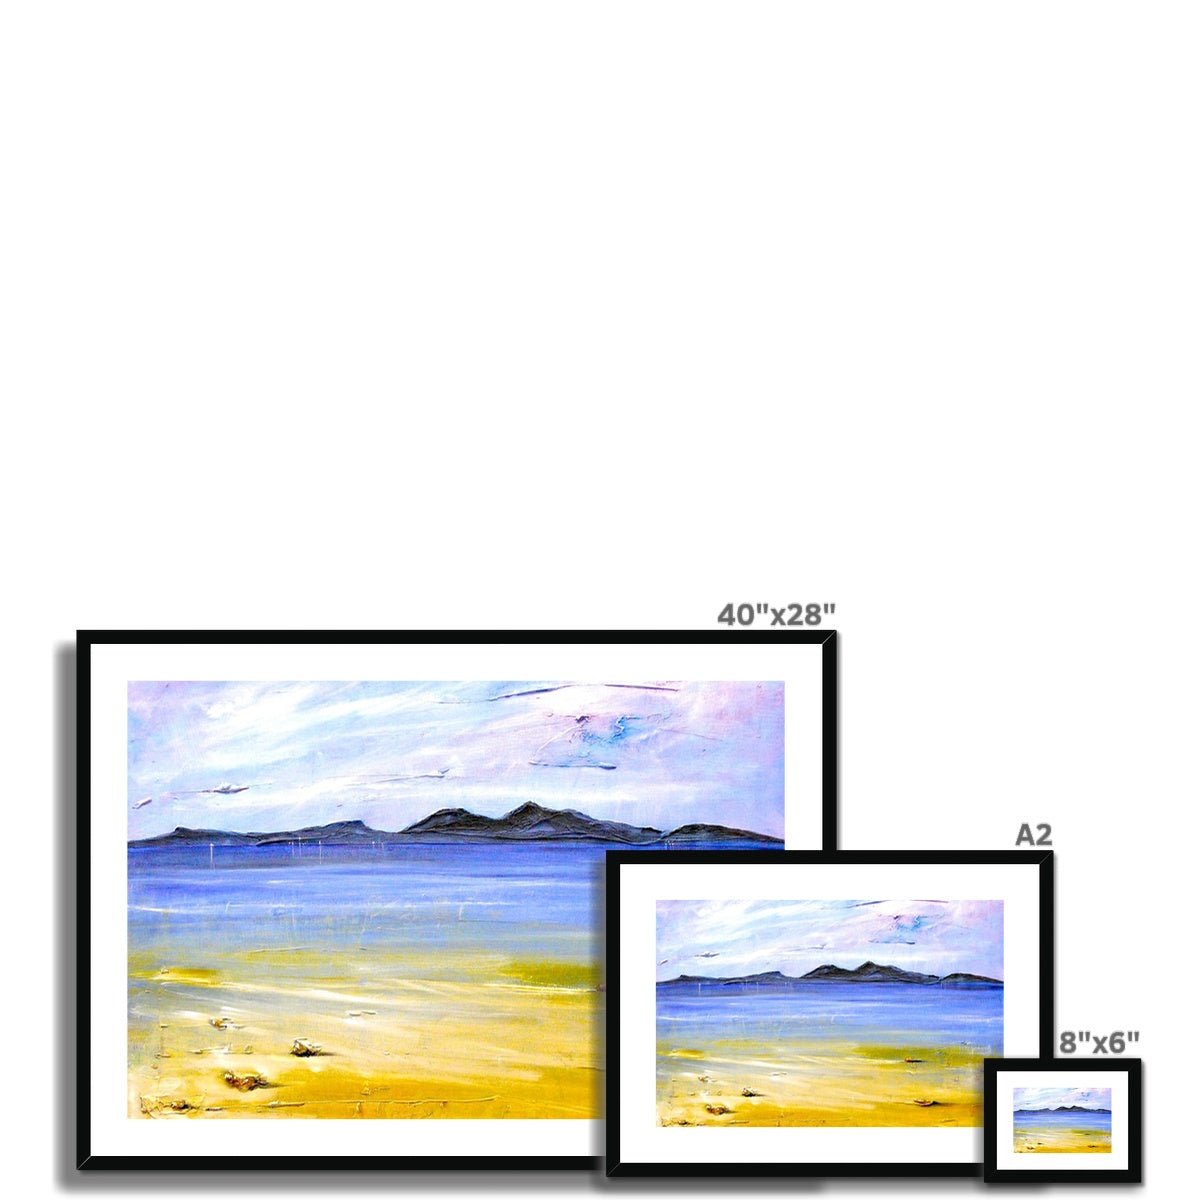 Camusdarach Beach Arisaig Painting | Framed & Mounted Prints From Scotland-Framed & Mounted Prints-Scottish Highlands & Lowlands Art Gallery-Paintings, Prints, Homeware, Art Gifts From Scotland By Scottish Artist Kevin Hunter